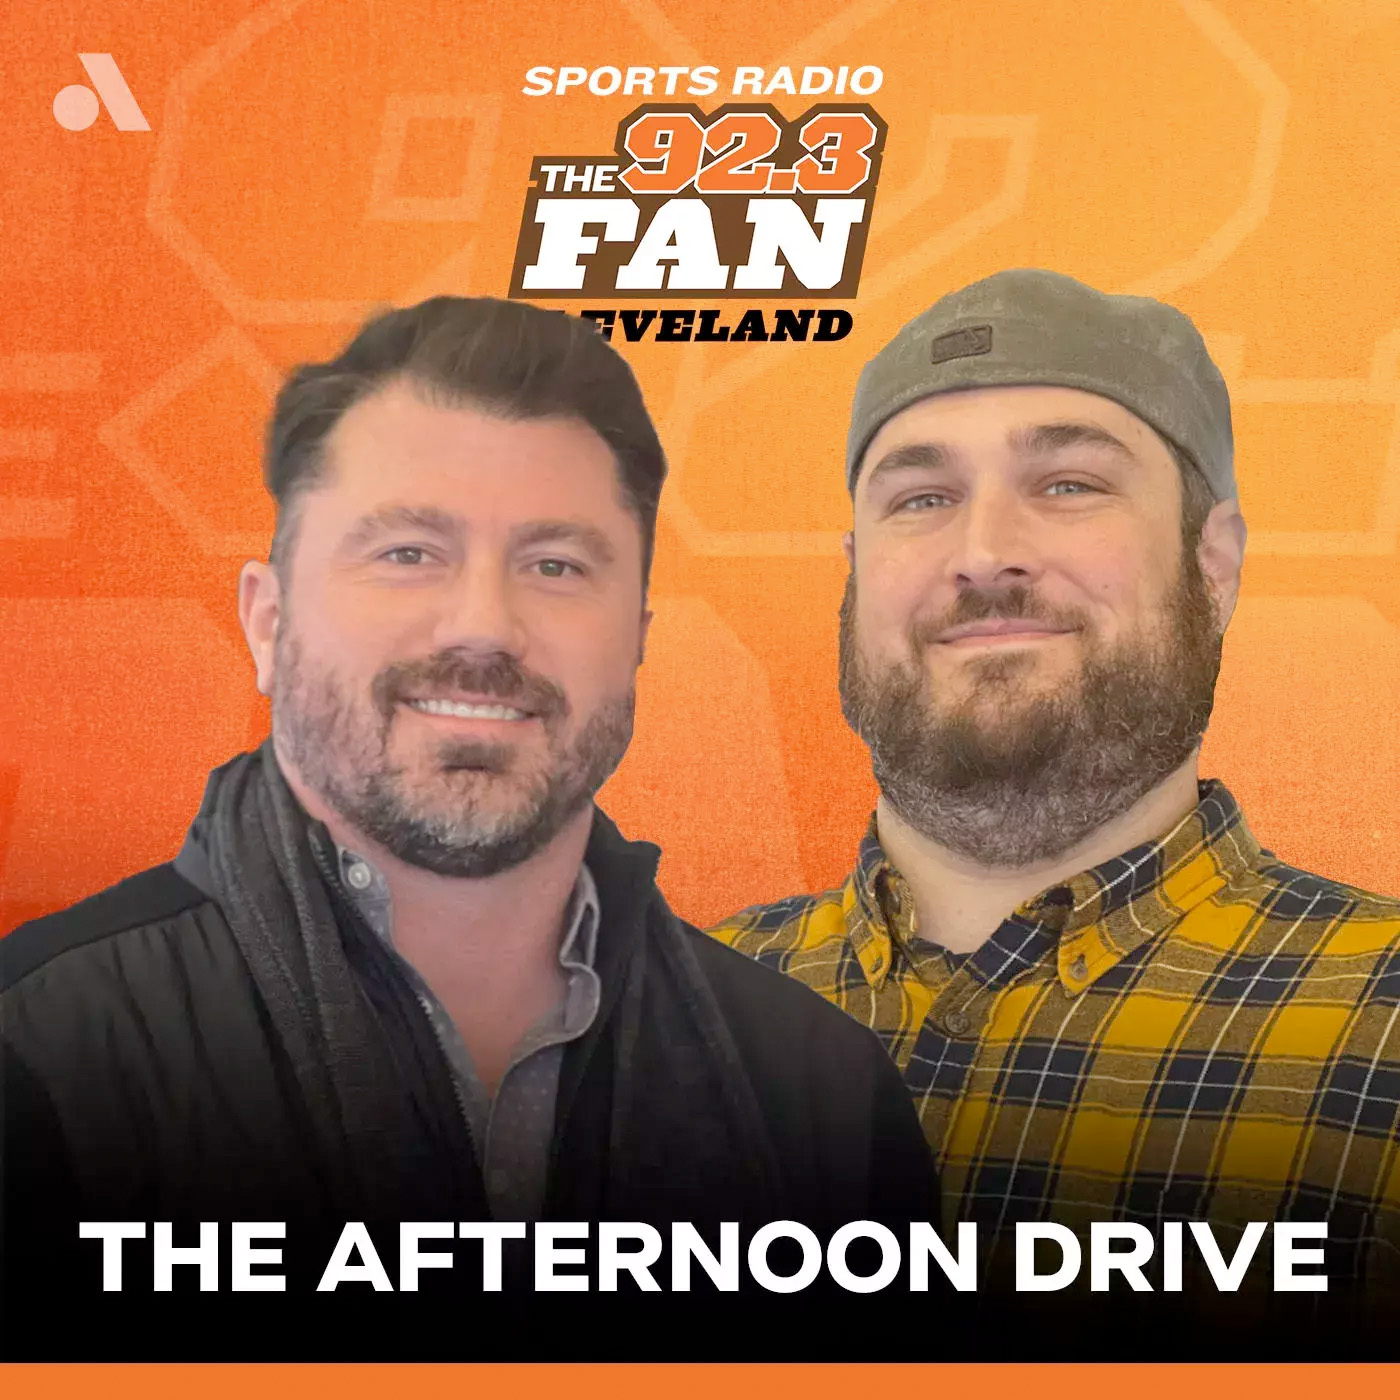 Hour 1: Are fans feeling better/worse about the Cavs since the season ended + NFL QBs physical condition being criticized